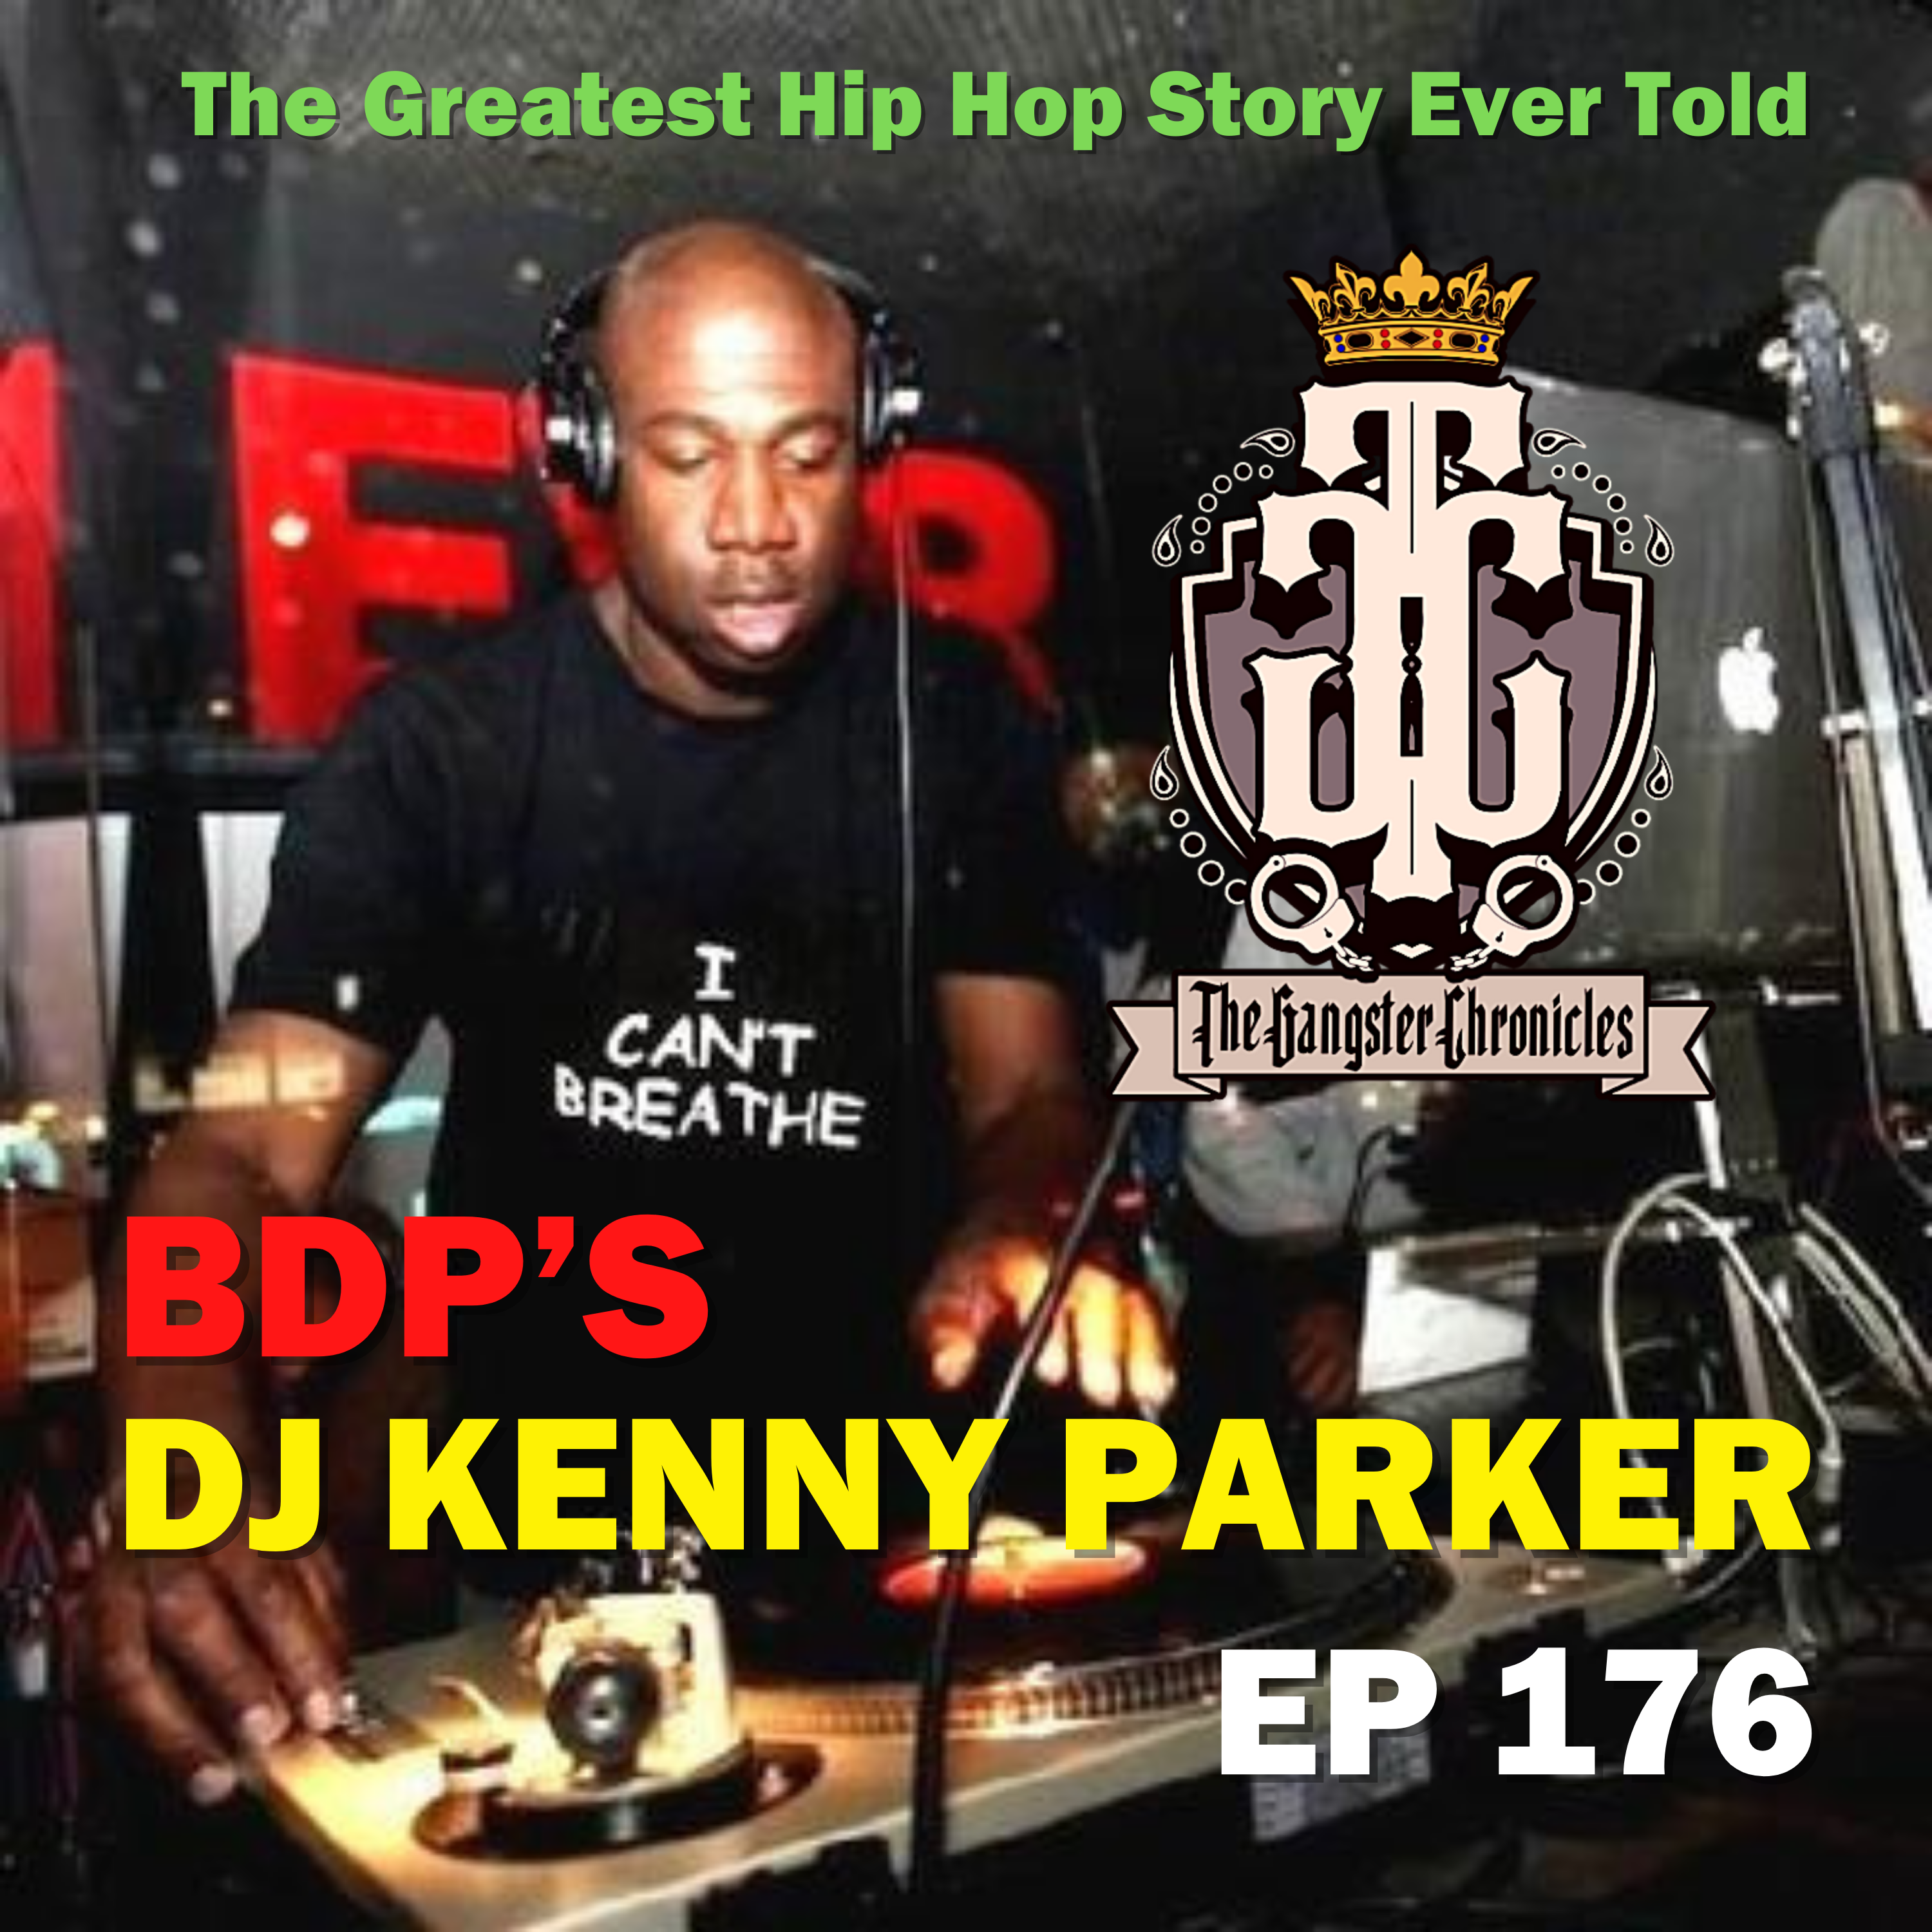 KRS-One's Bro DJ Kenny Parker "The Greatest Hip Hop Story Ever Told"